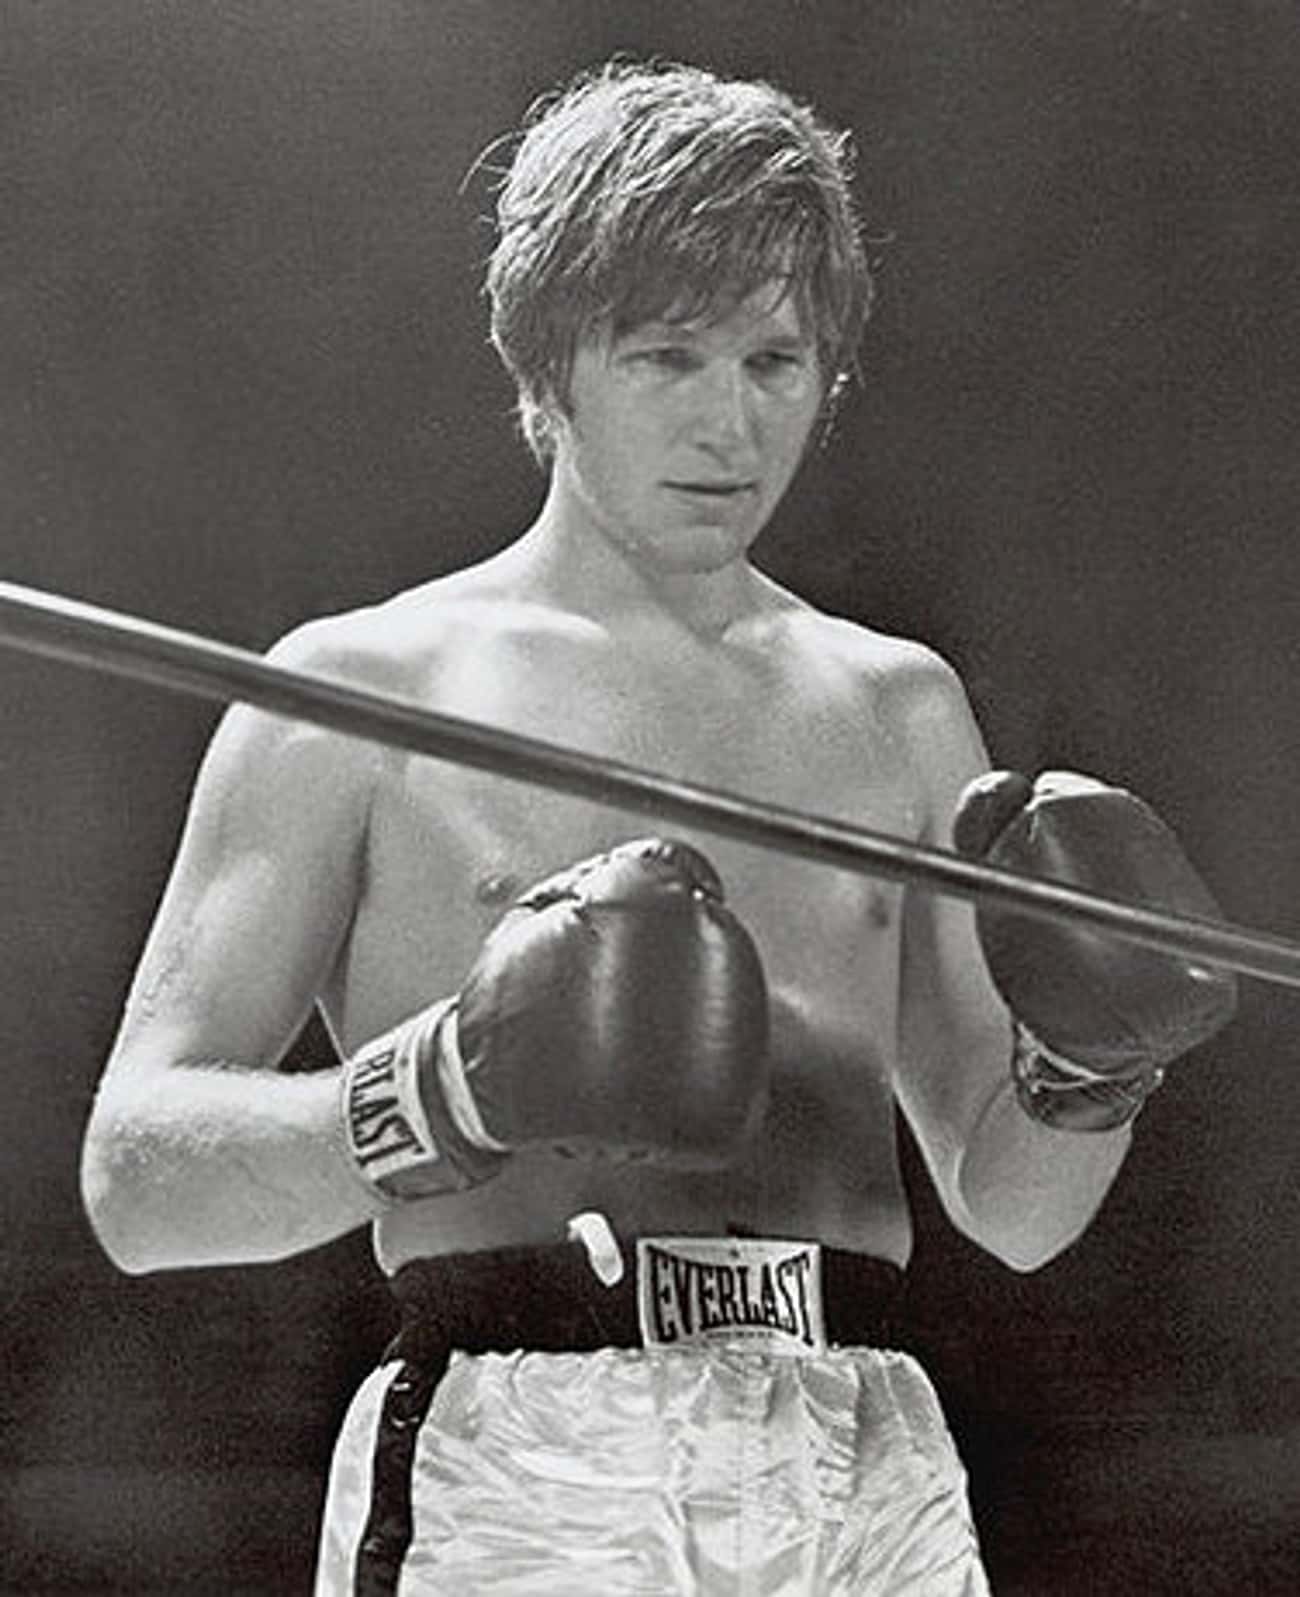 Young Jeff Bridges in Boxing Trunks